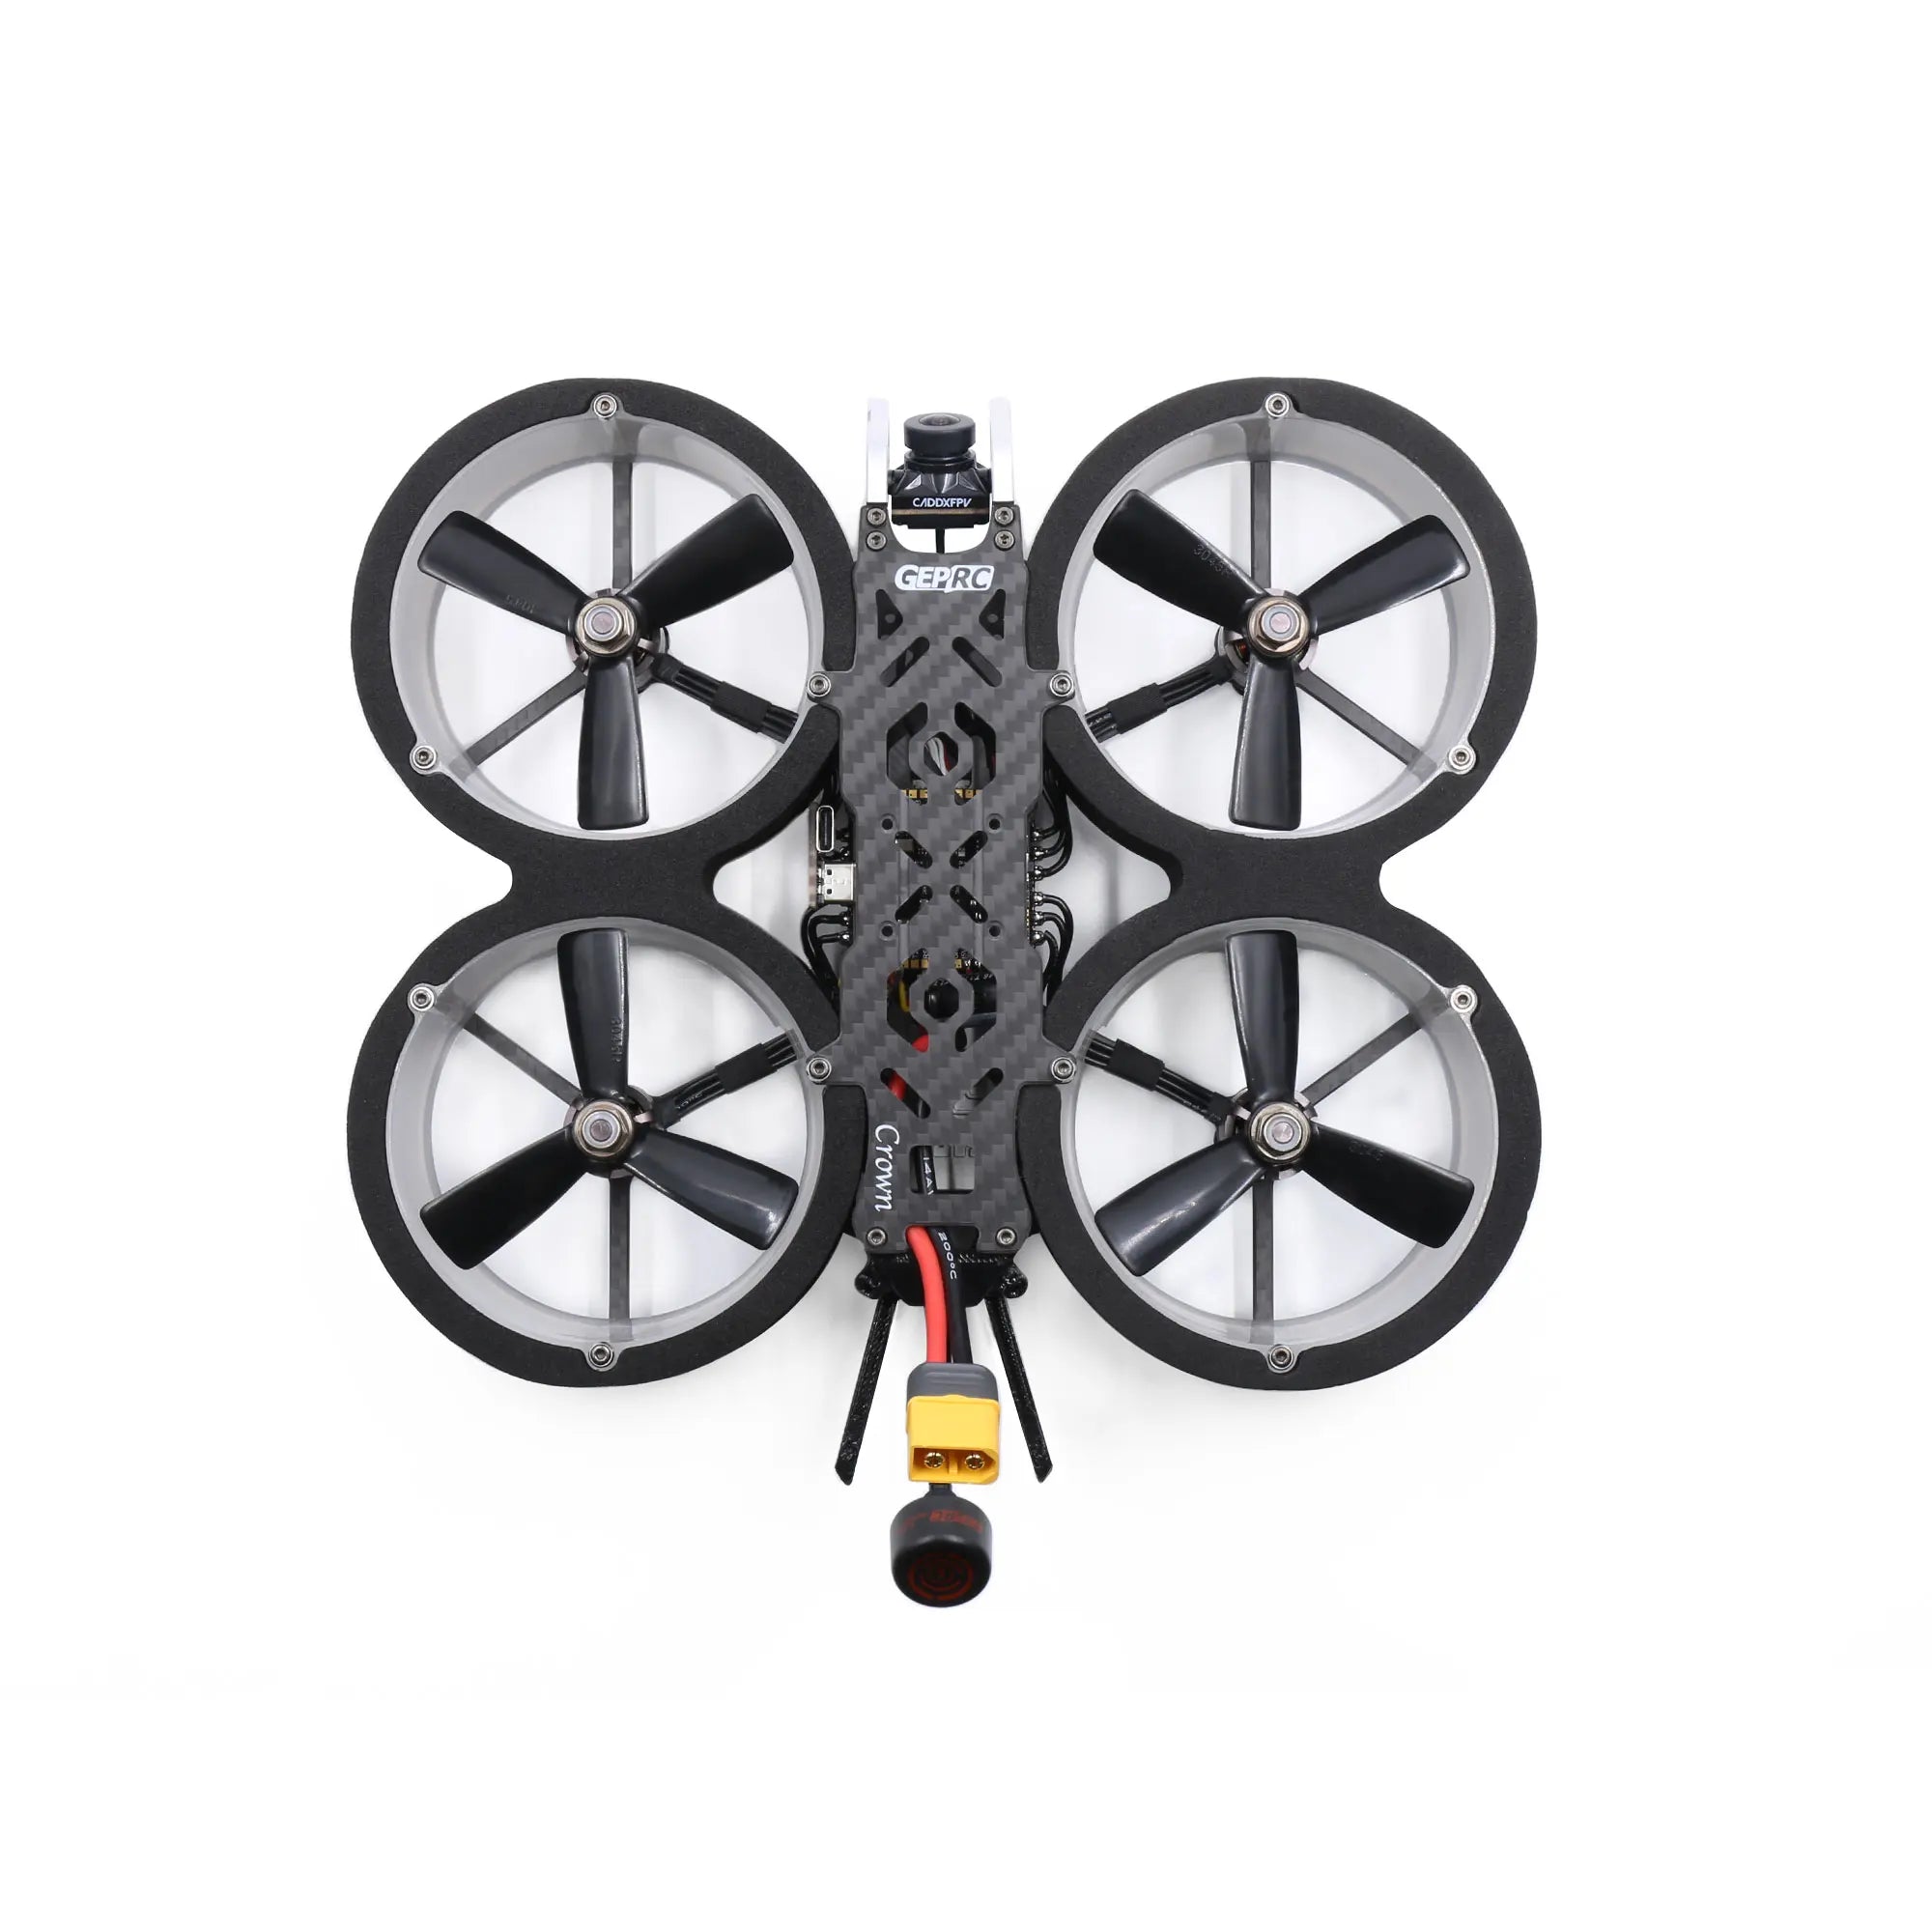 GEPRC Crown HD Cinewhoop FPV Drone, the drone comes with the Caddx Nebula Nano V2 camera . it may